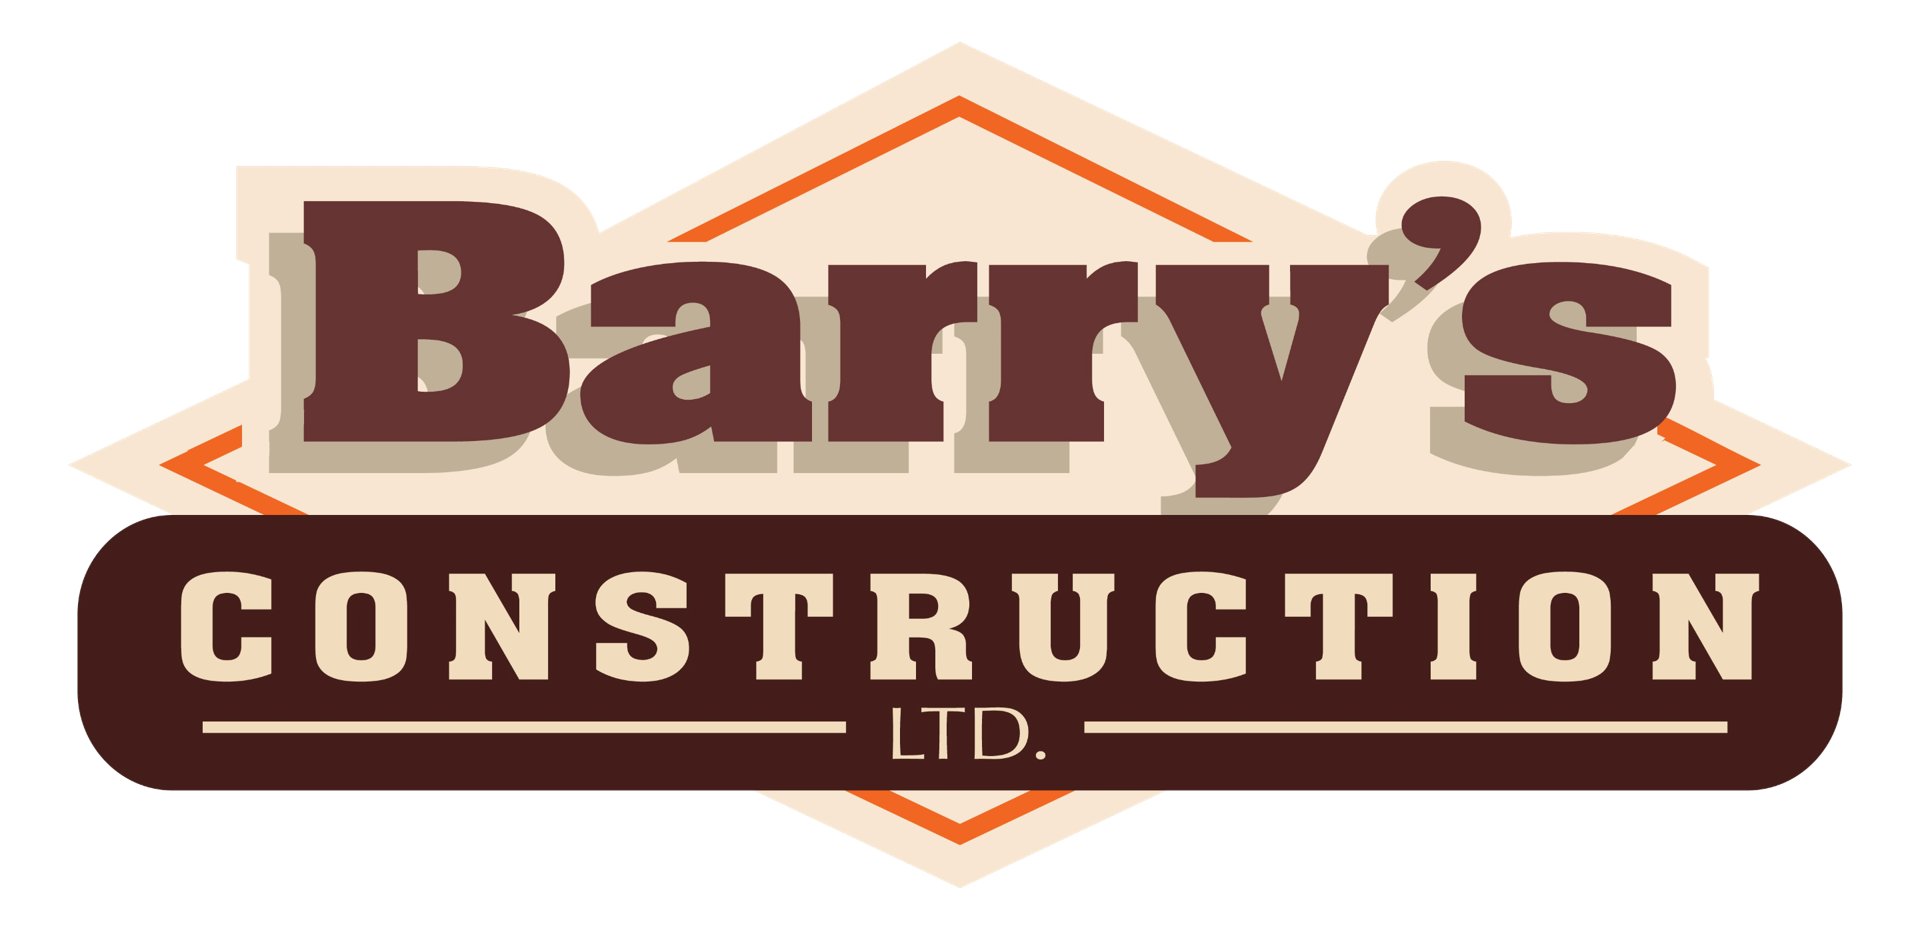 Barry's Construction & Insulation